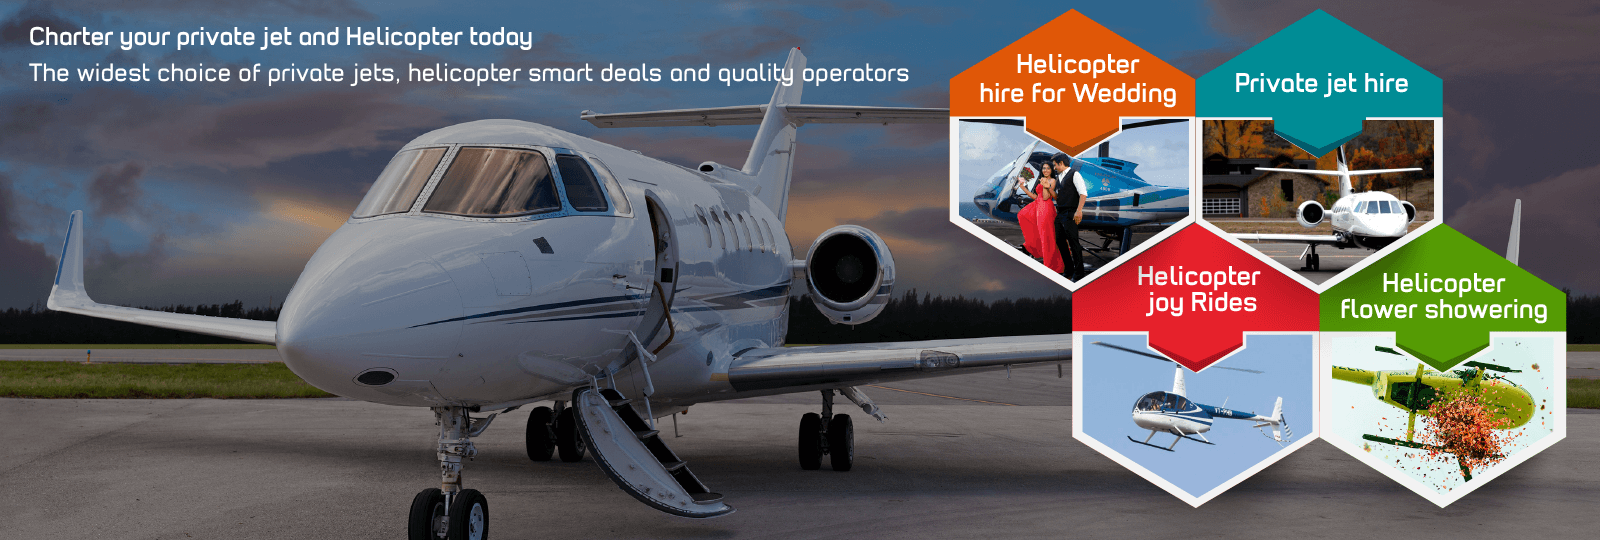 Private jet hire in ahmedabad